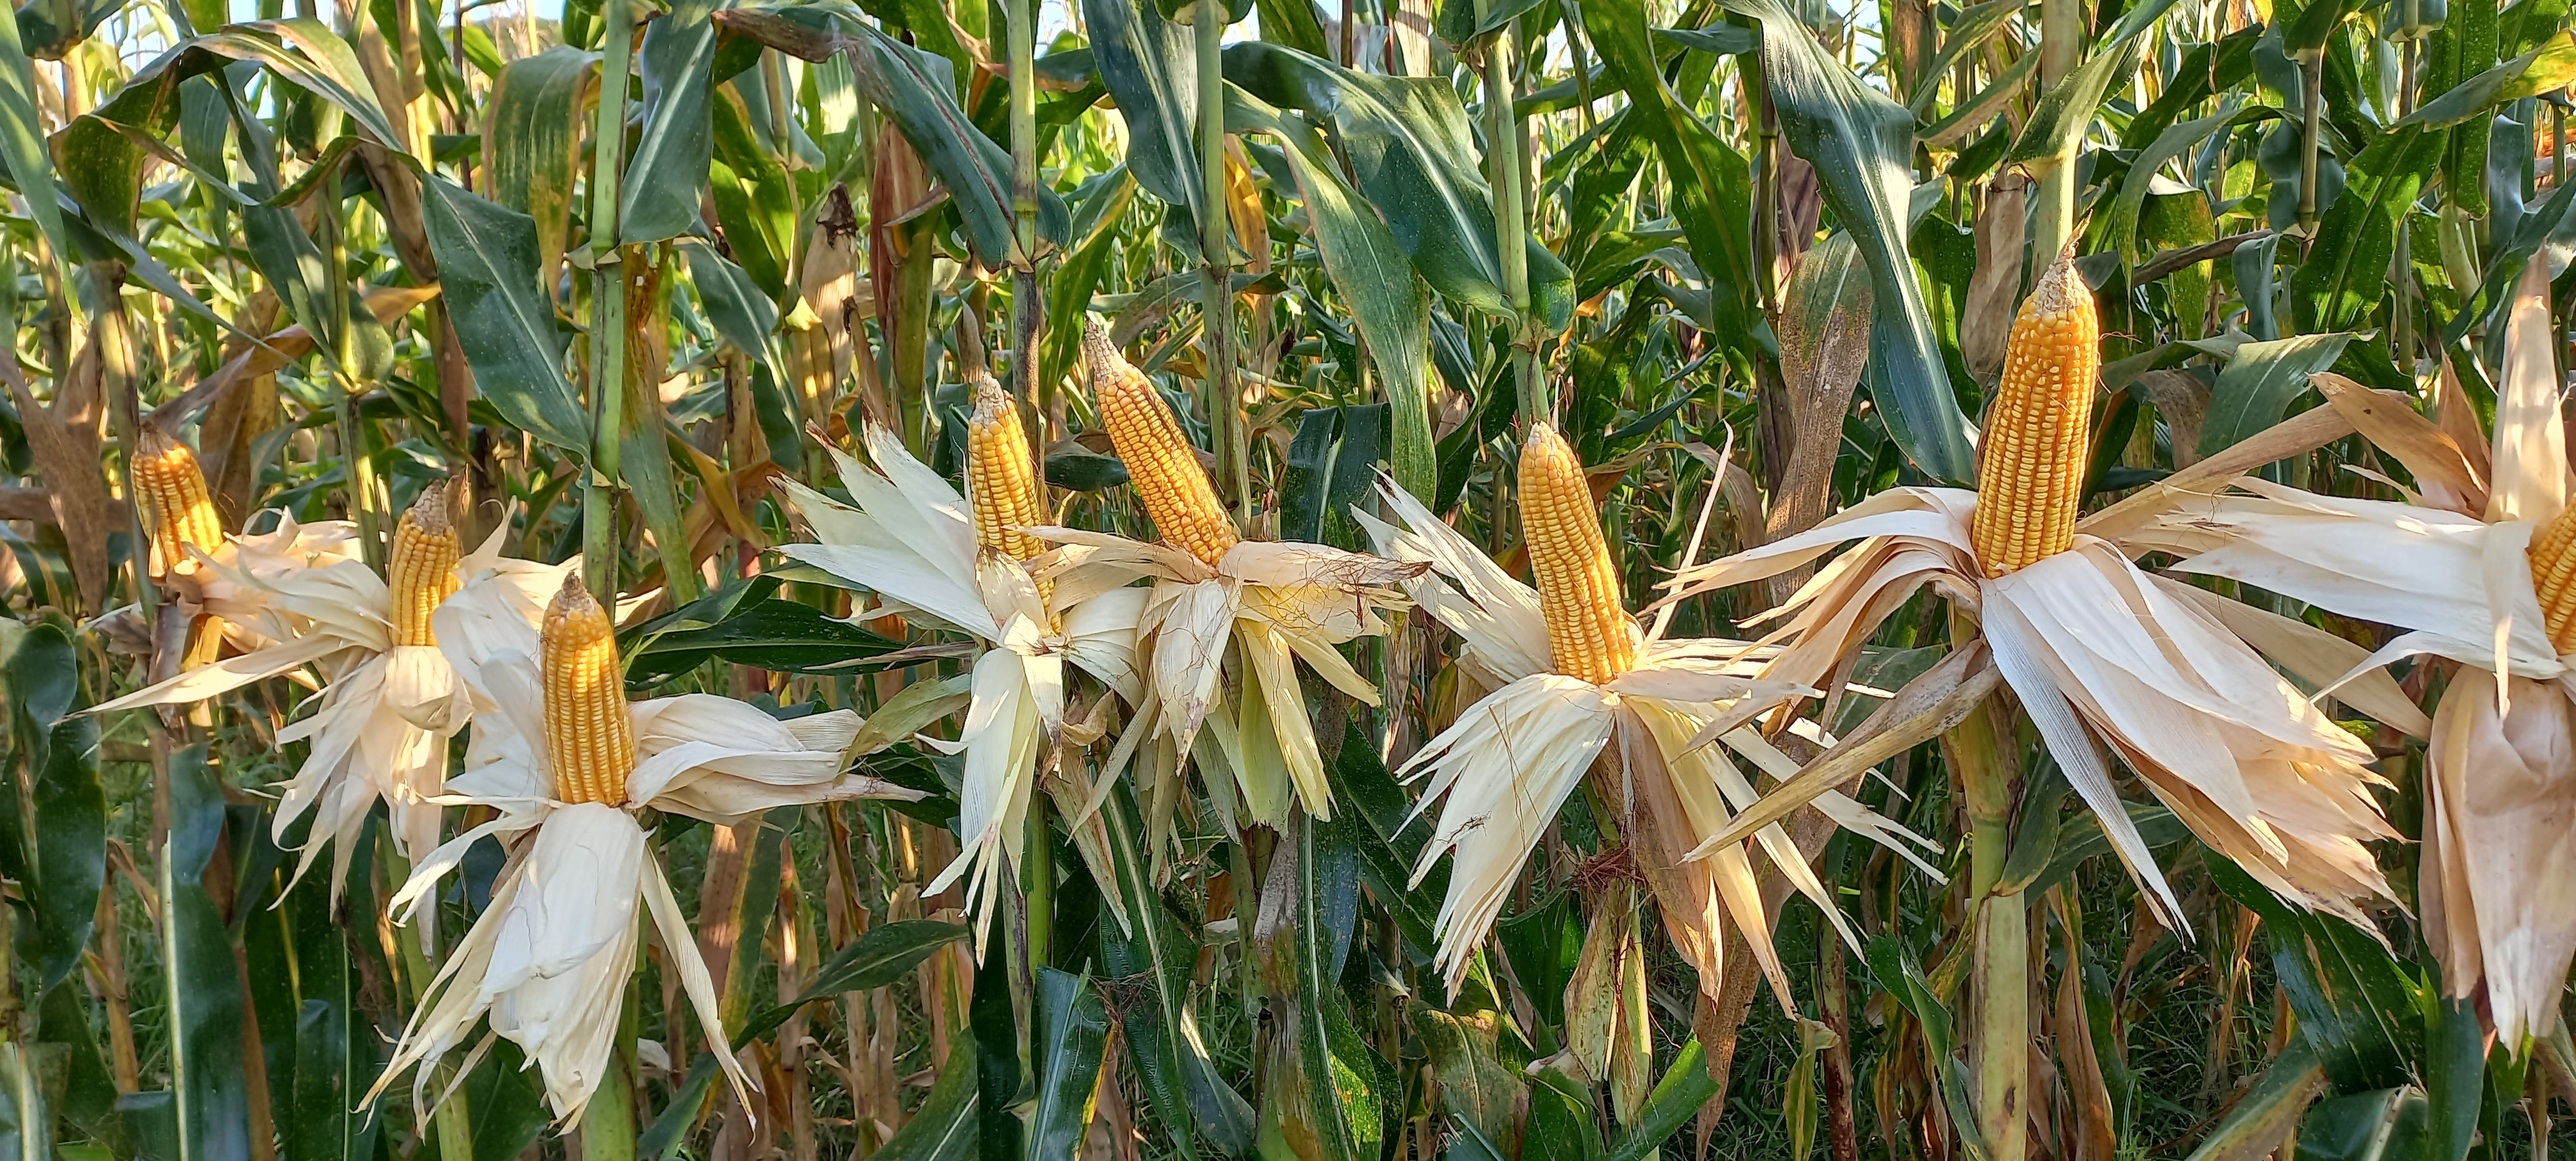 Maize/corn variety CORPOICA V-114